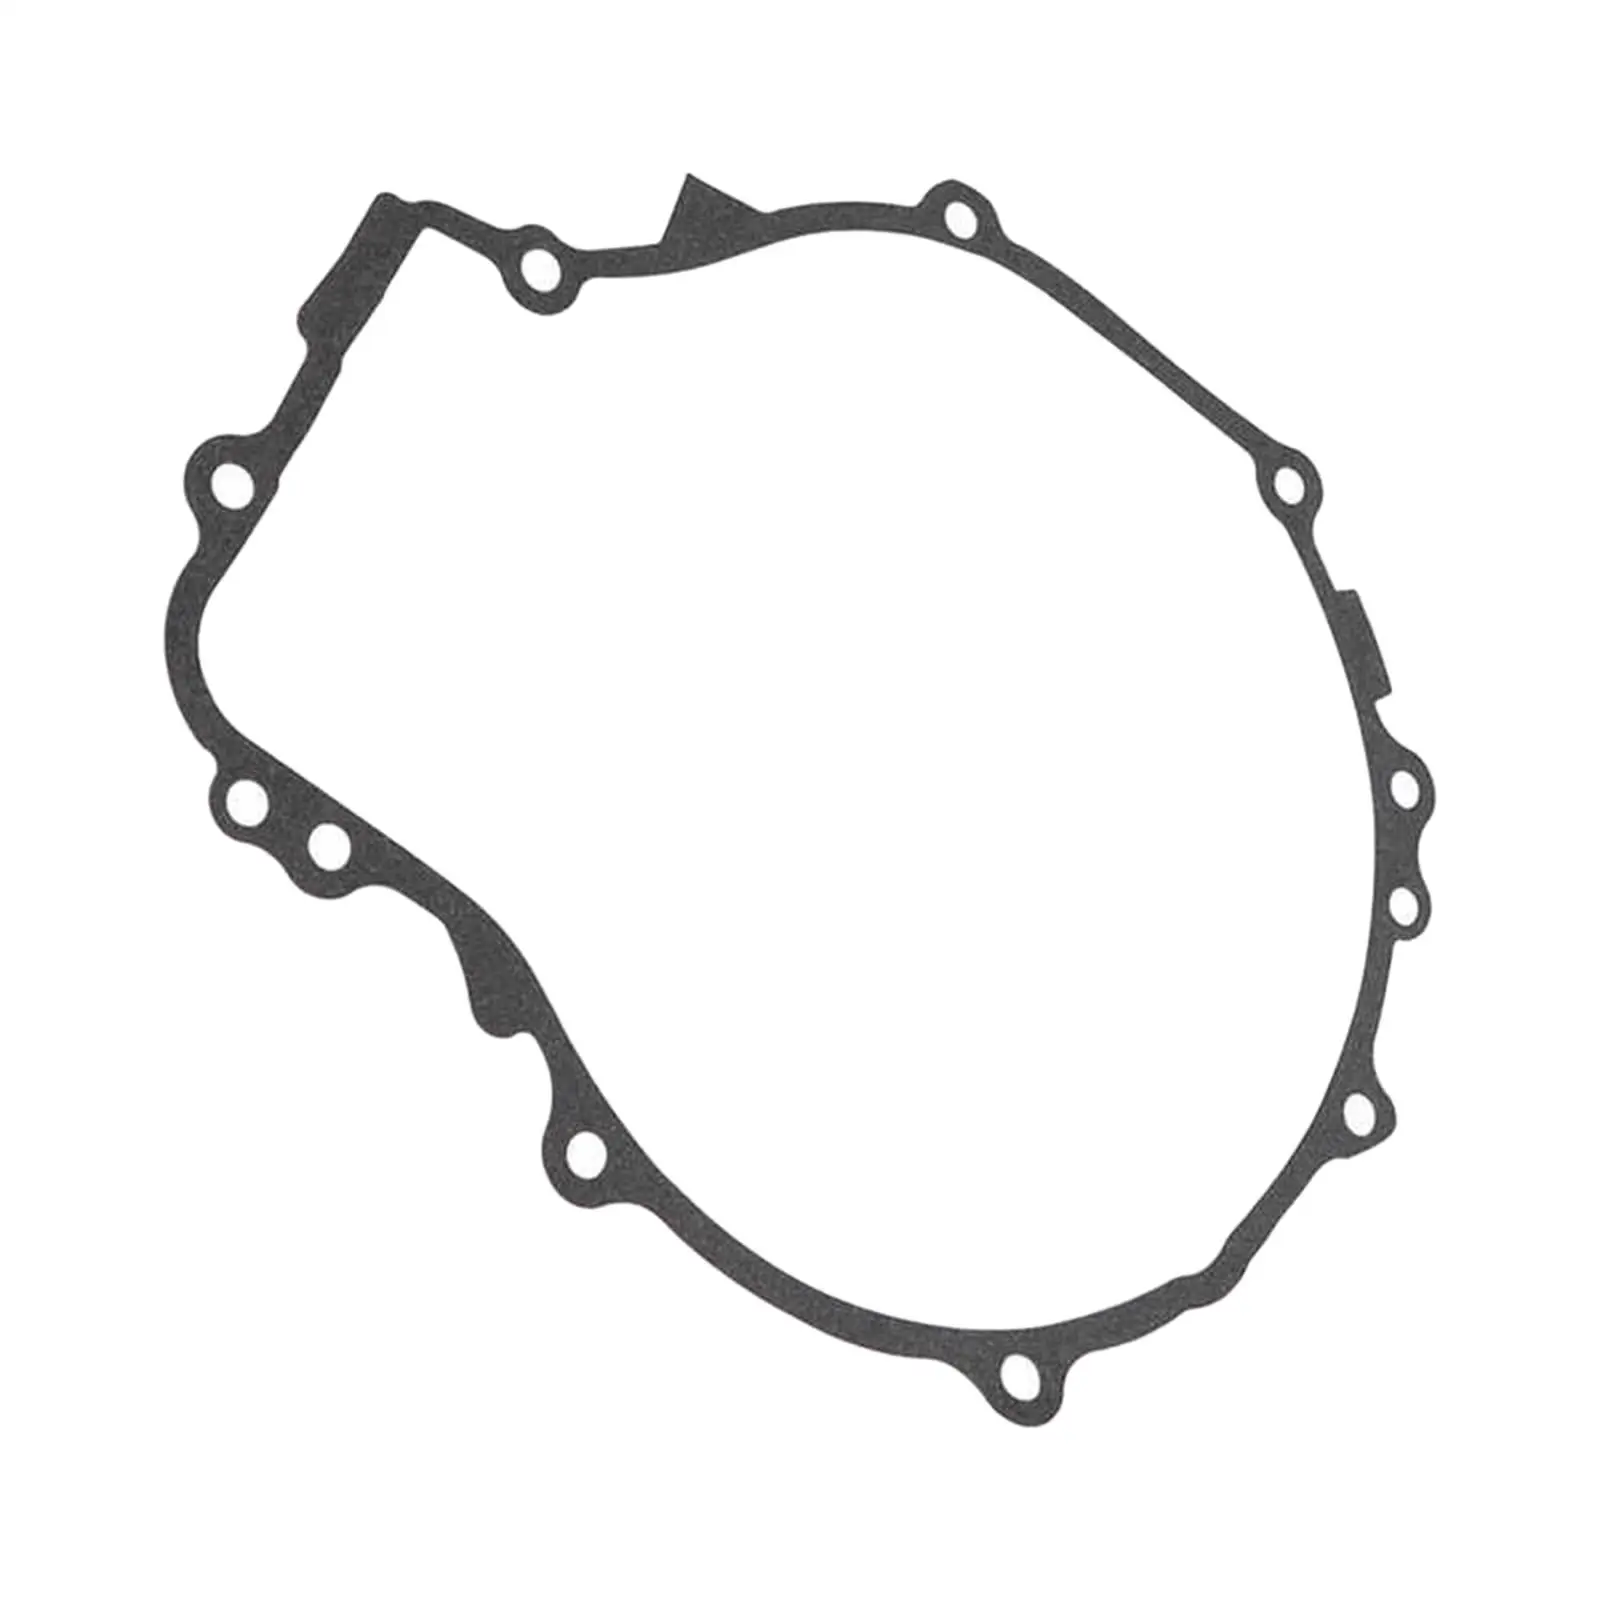 Automotive Pull Start Gasket, 3084933 for 500 Replace Easy Installation.